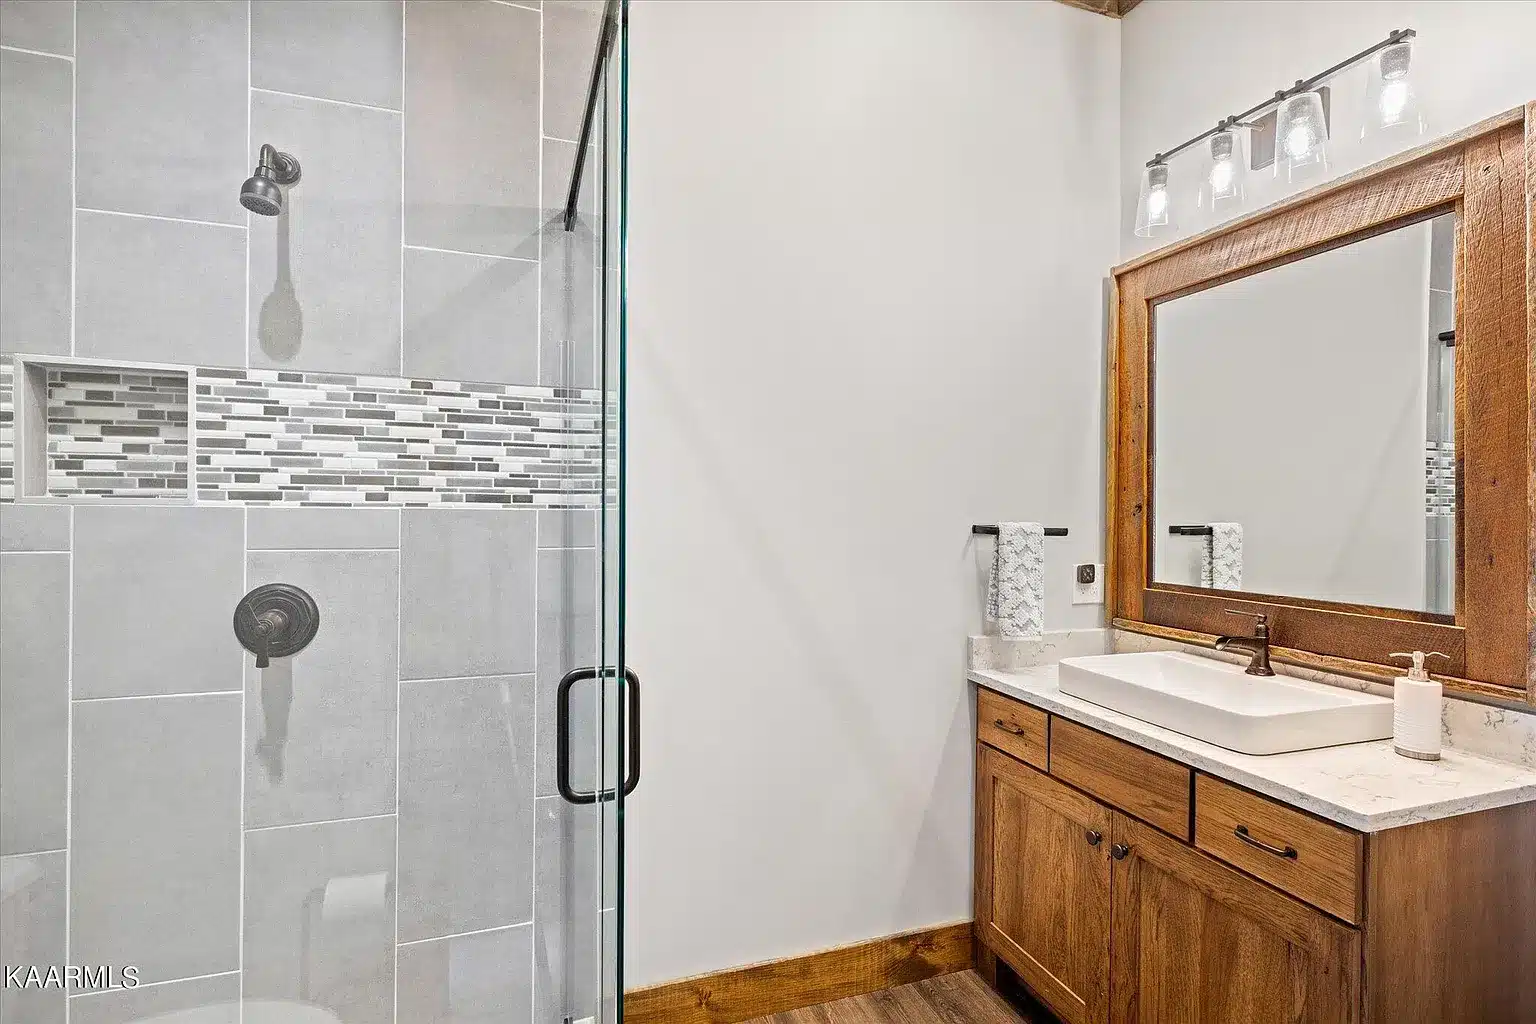 Custom shower with all glass doors, shower seat and space between vanity and glass